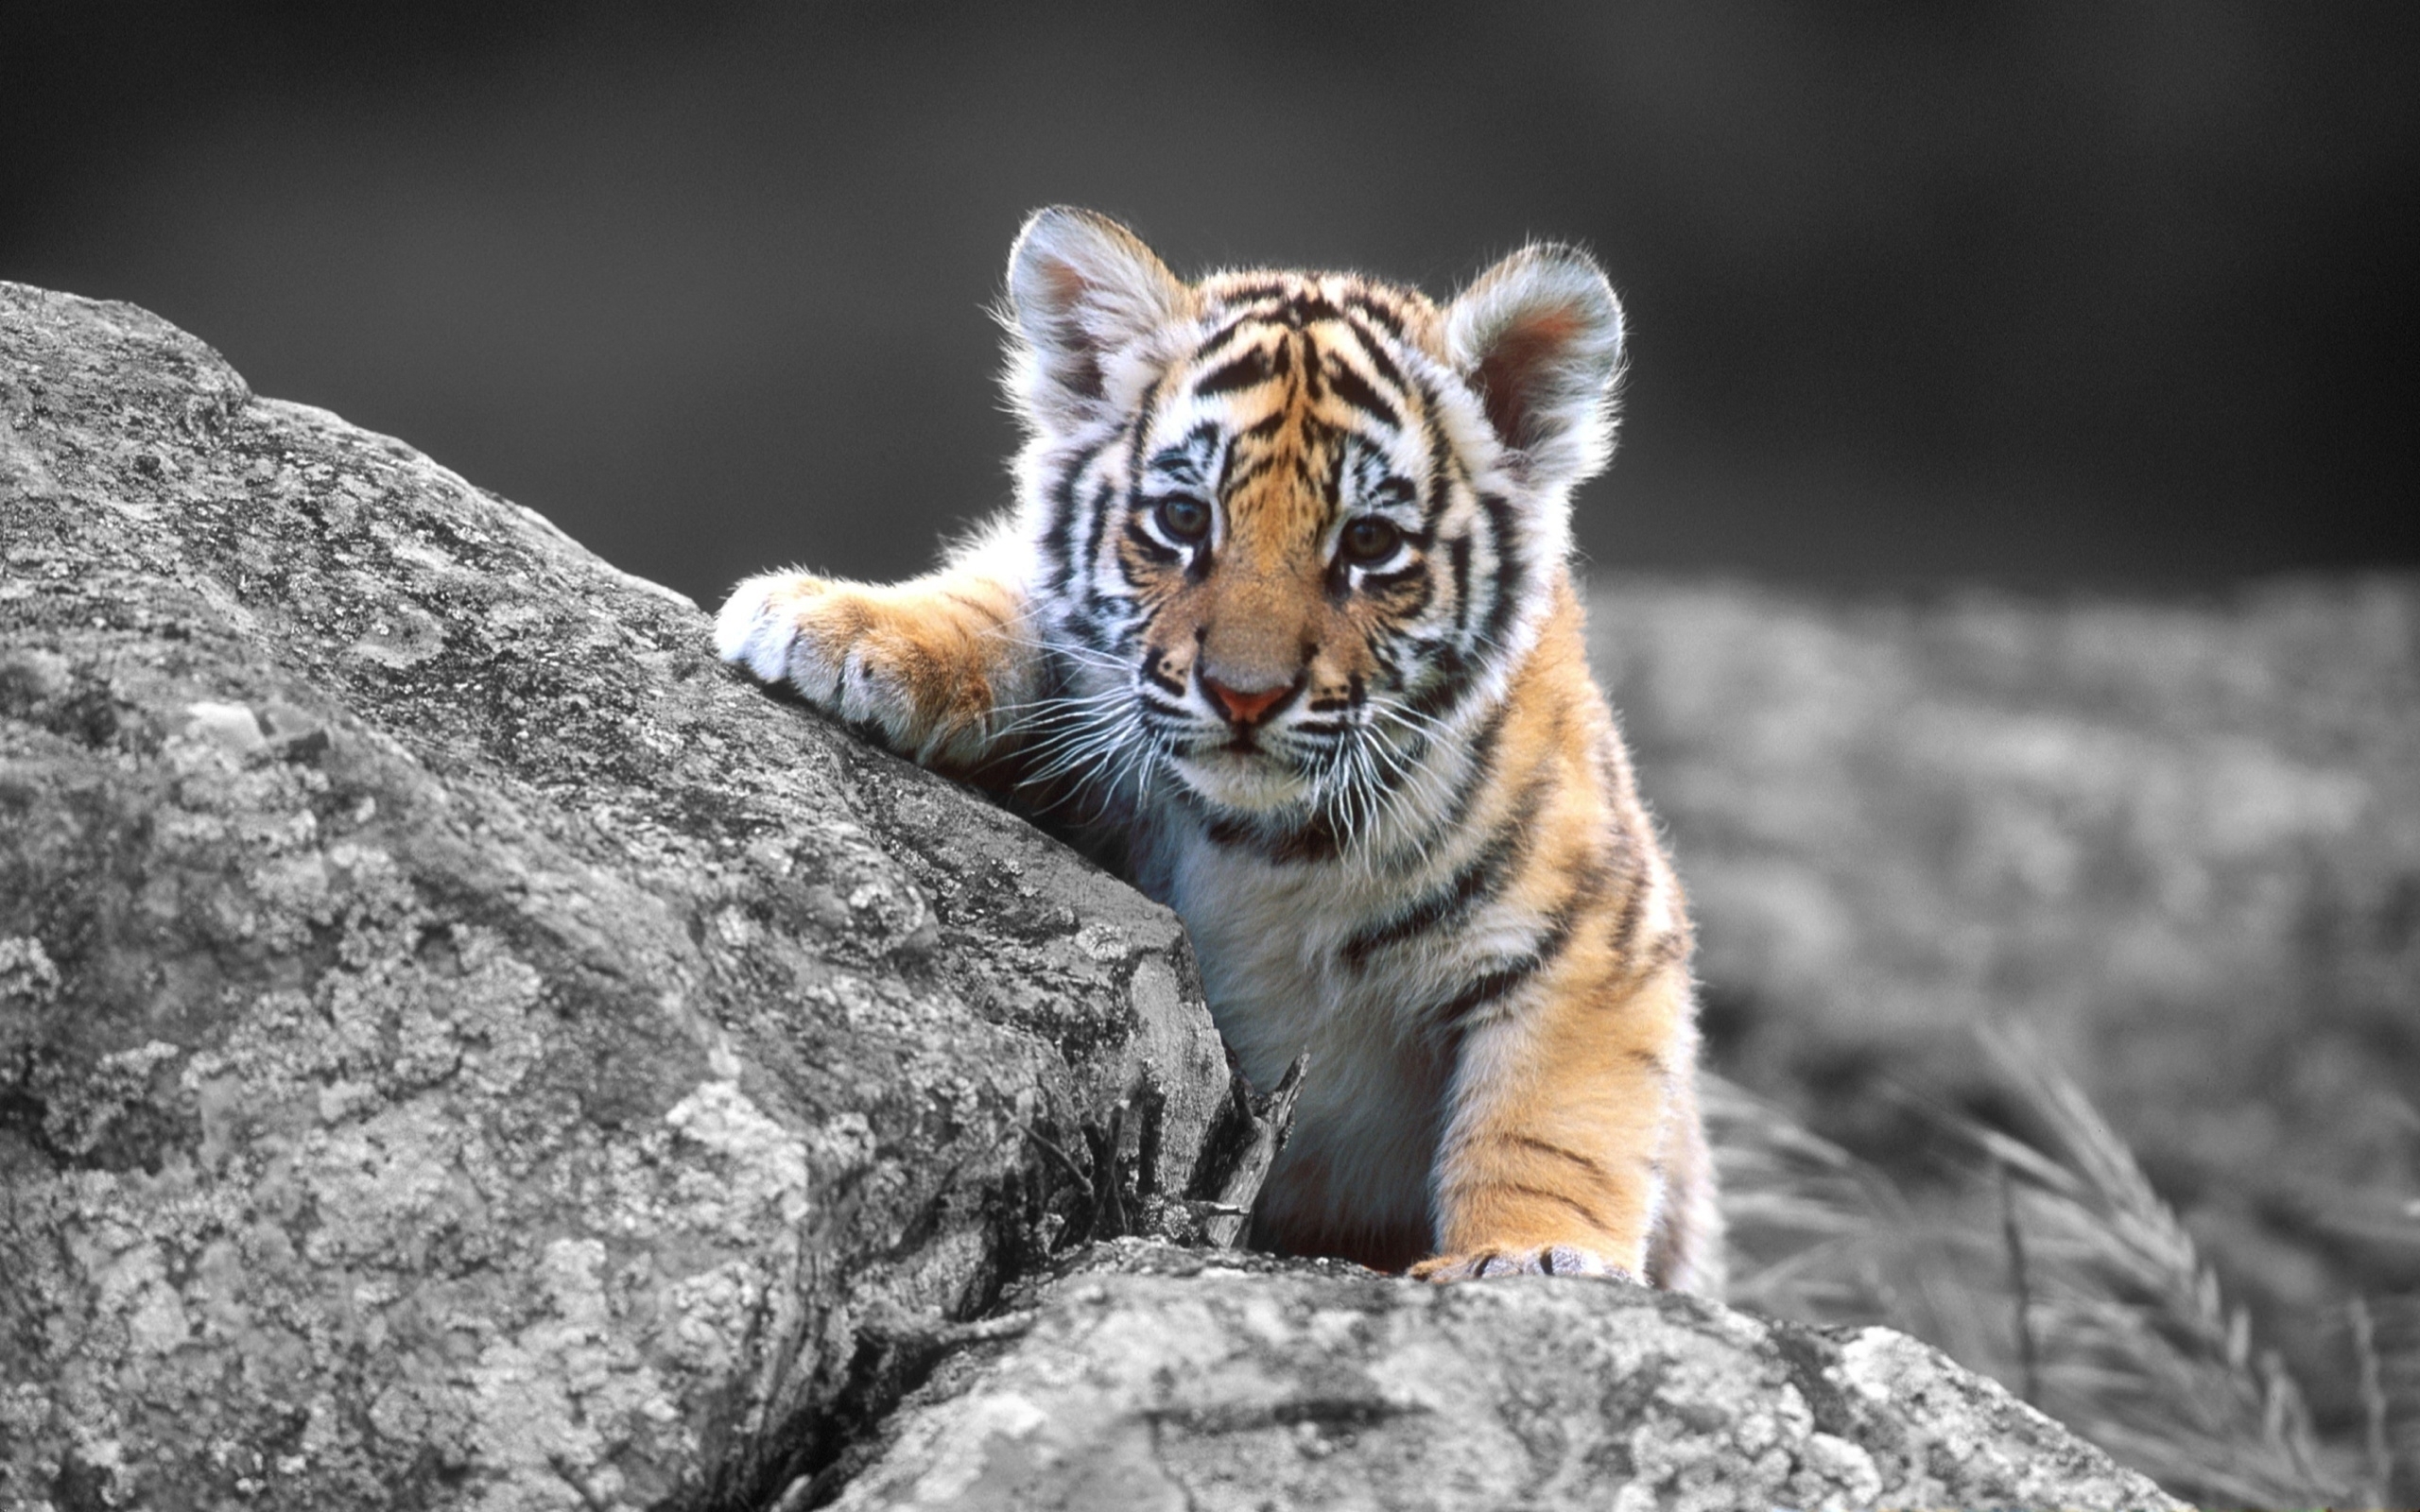 30333 download wallpaper animals, gray, tigers screensavers and pictures for free